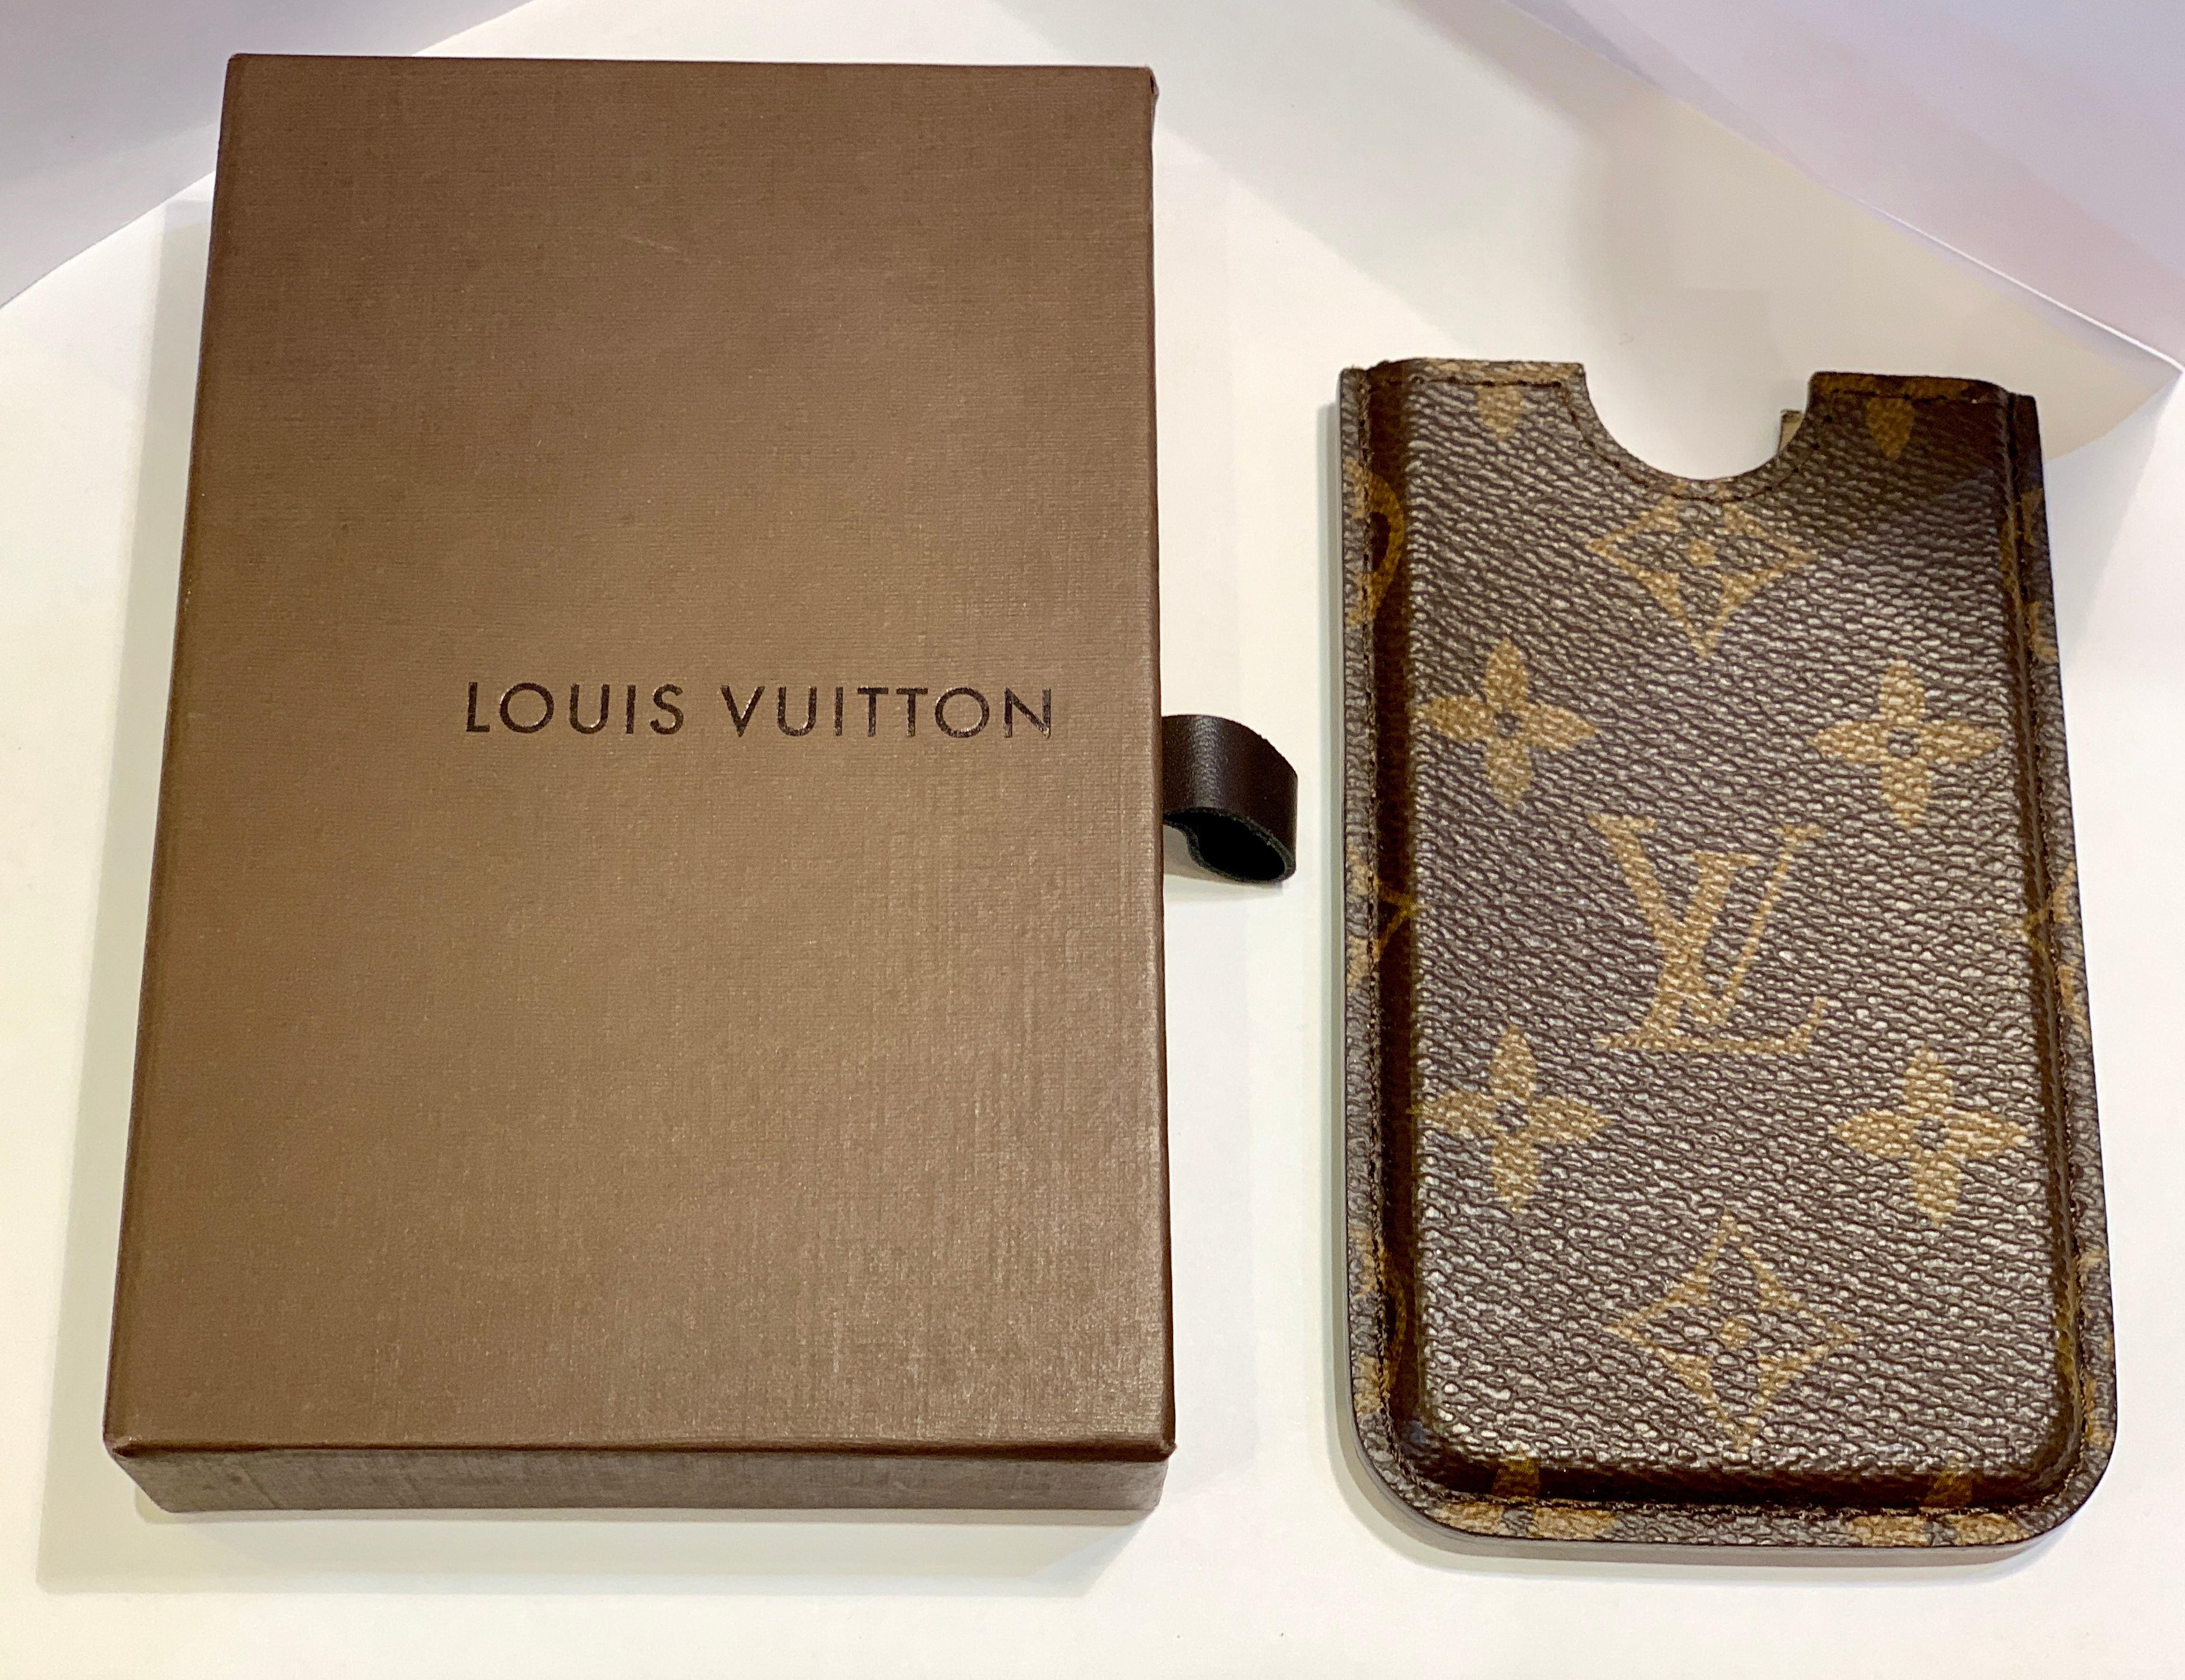 Classic Louis Vuitton Iconic Monogram Cell Phone Case or Holder 